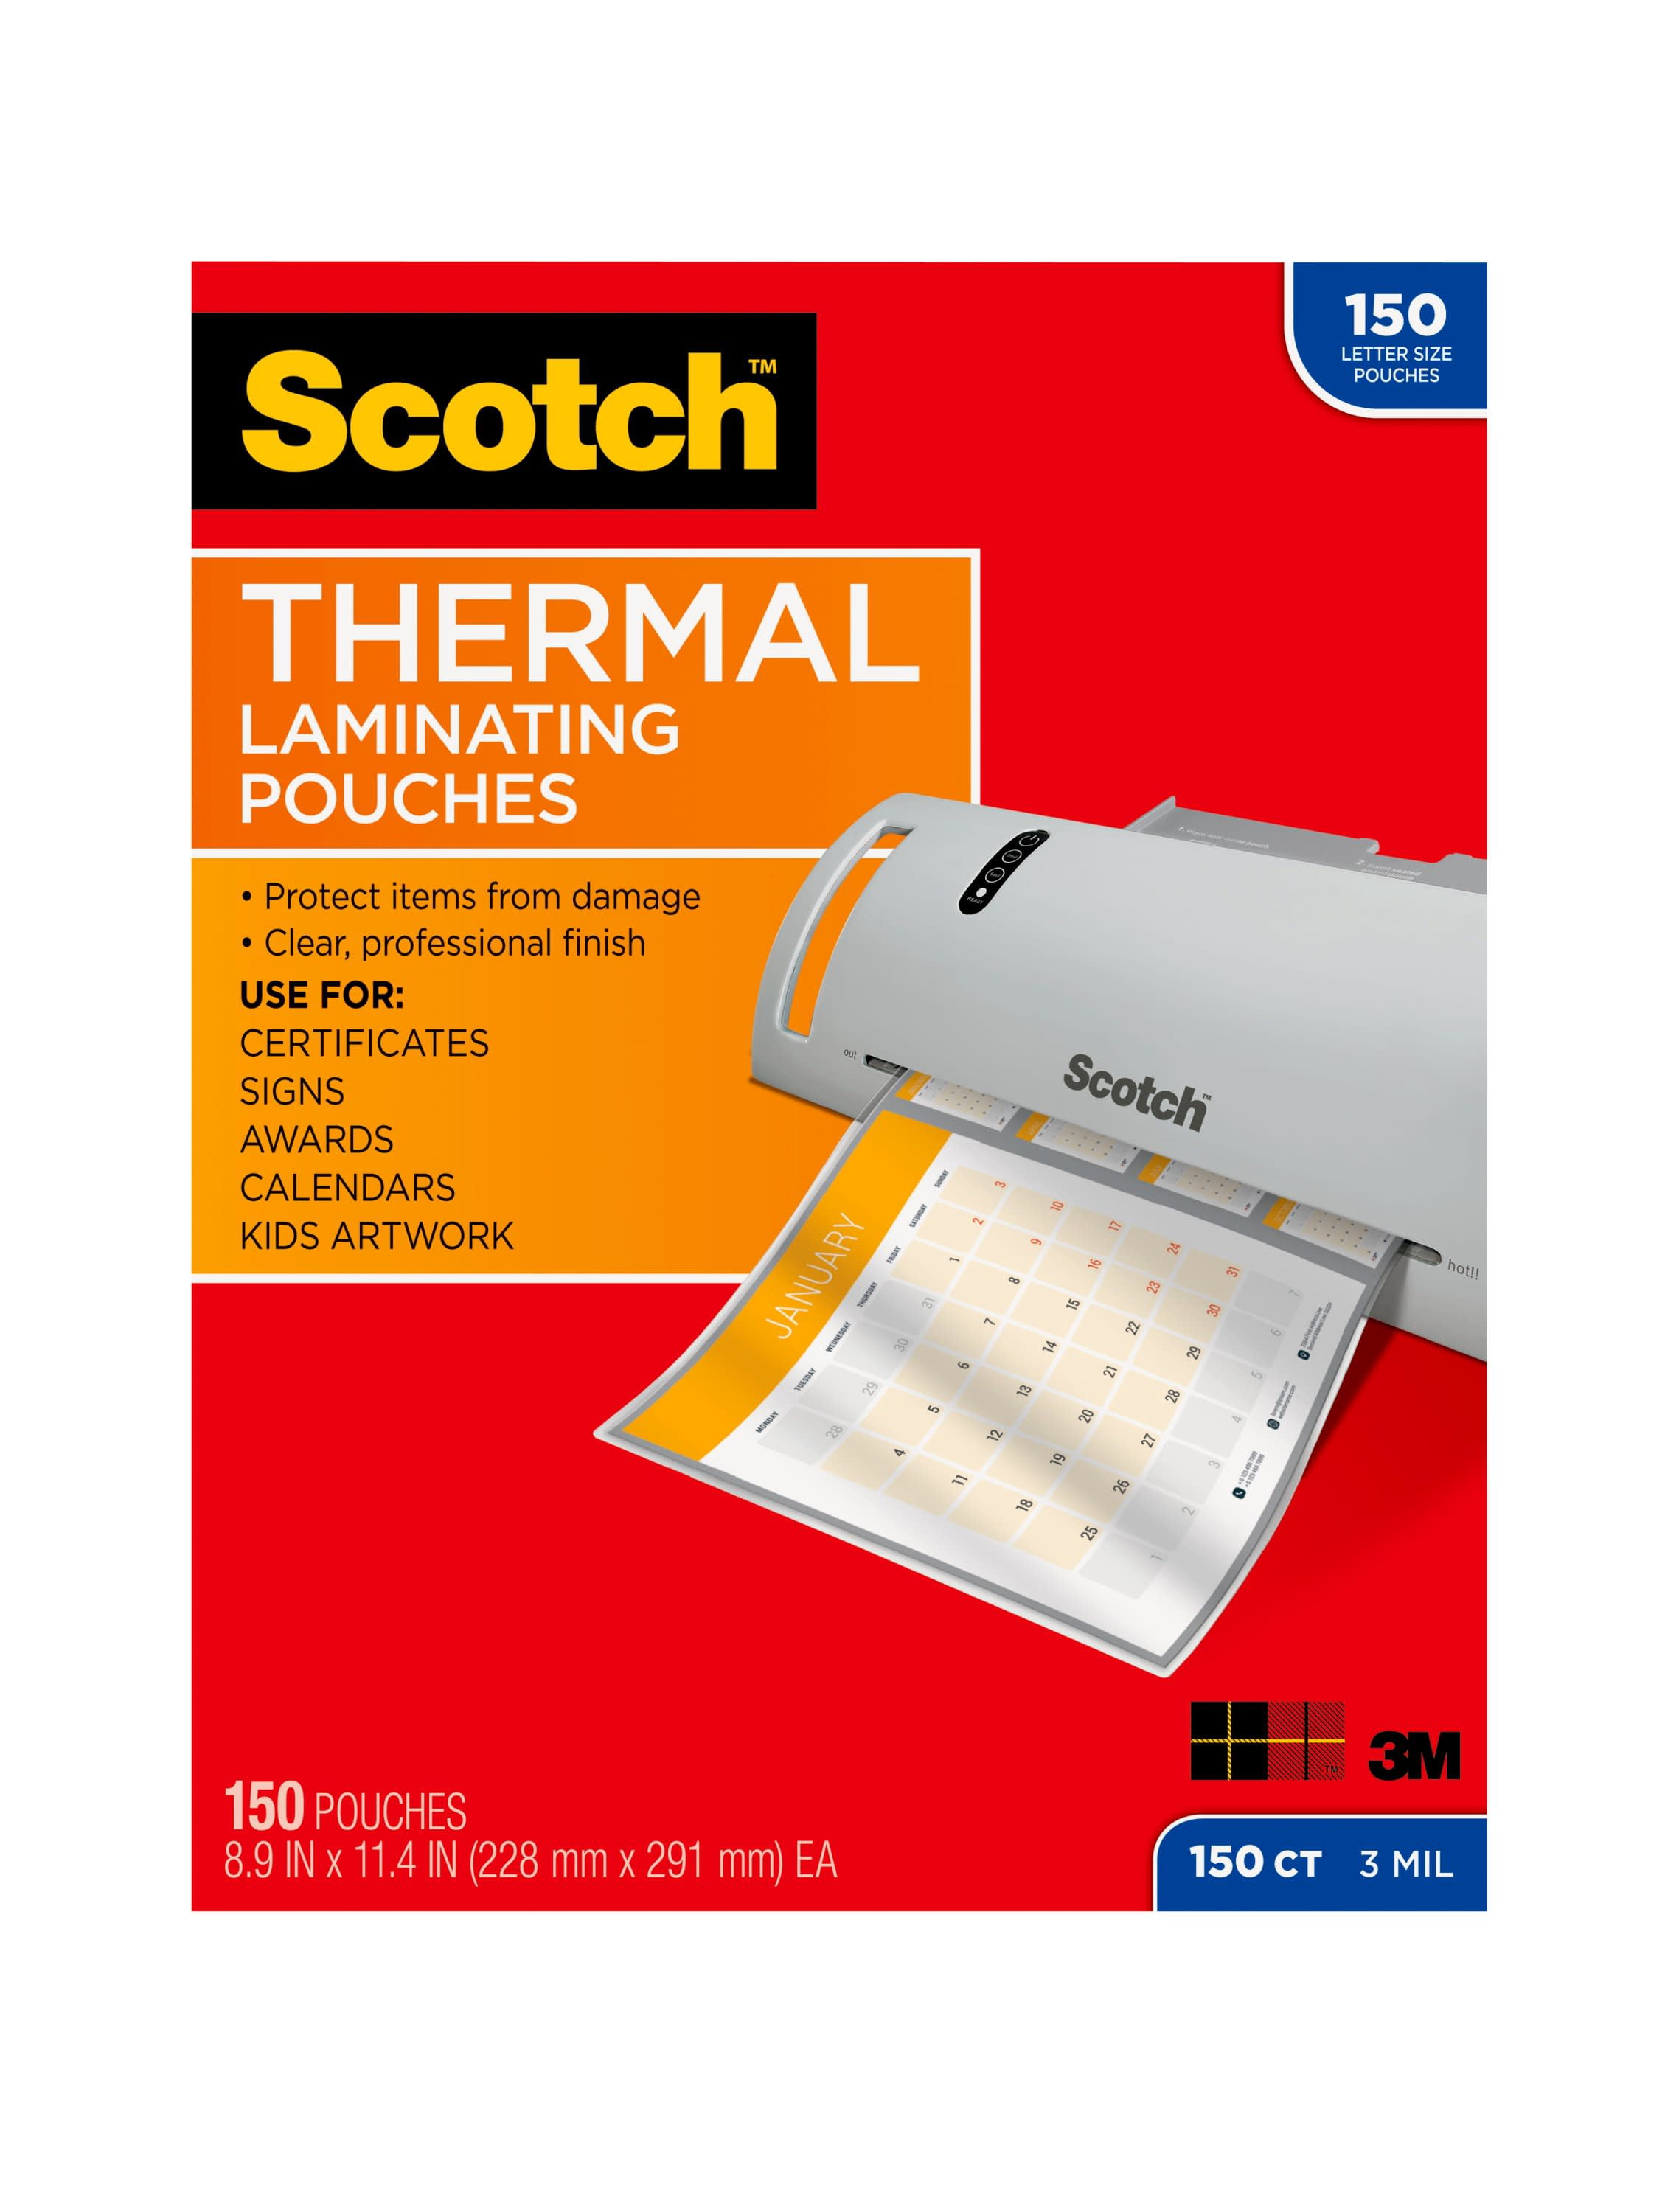 50 LETTER Laminating Pouches Laminator Sheets 9 x 11-1/2 5 Mil Scotch Quality 